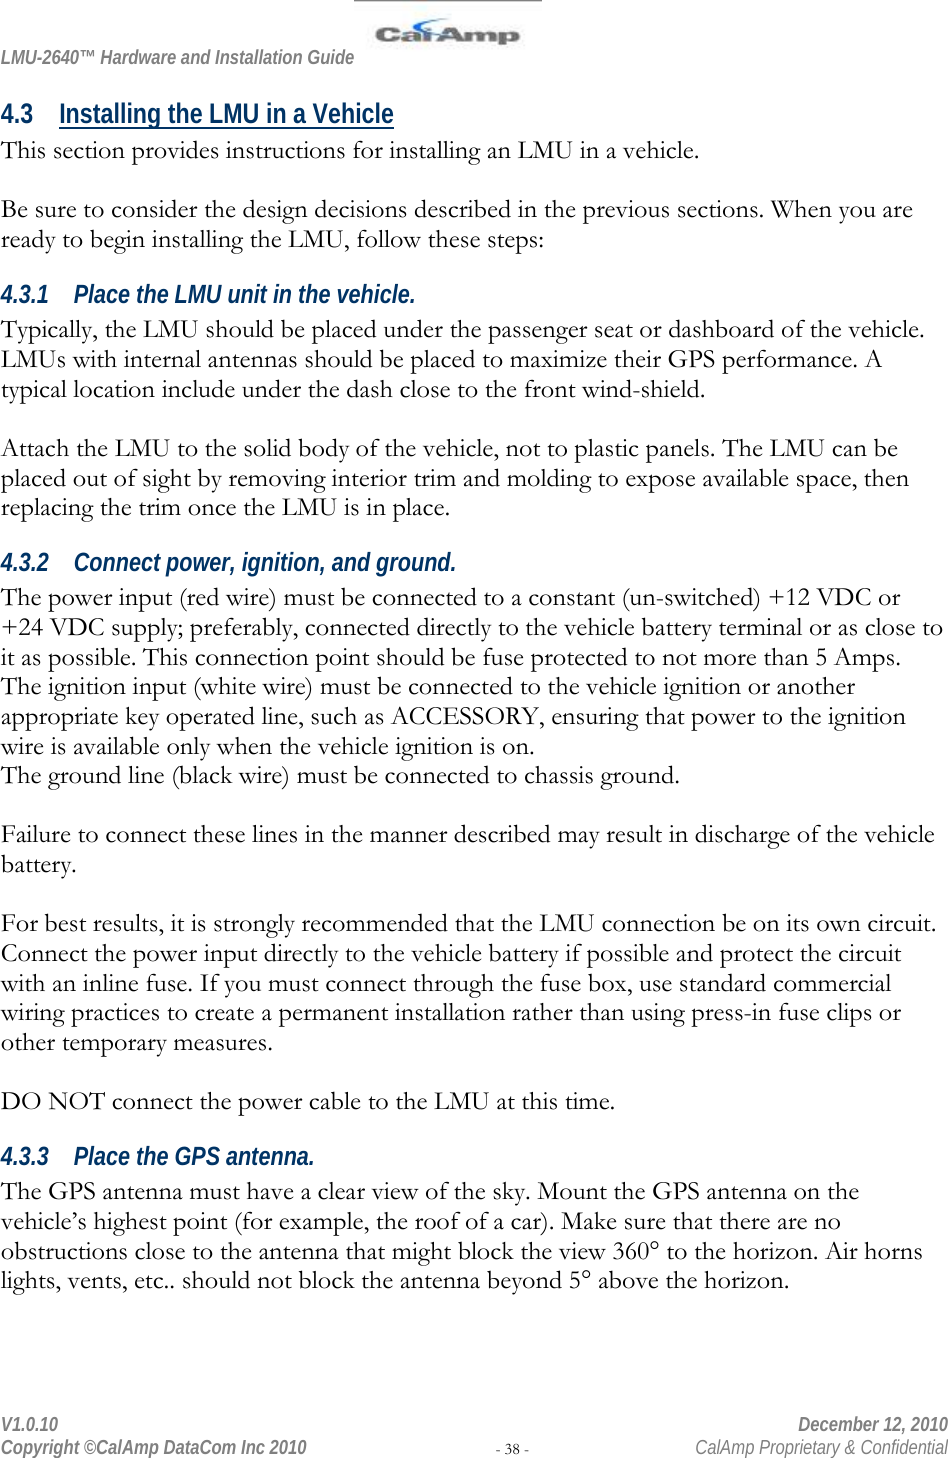 LMU-2640™ Hardware and Installation Guide  V1.0.10    December 12, 2010 Copyright ©CalAmp DataCom Inc 2010 - 38 -  CalAmp Proprietary &amp; Confidential 4.3 Installing the LMU in a Vehicle This section provides instructions for installing an LMU in a vehicle.   Be sure to consider the design decisions described in the previous sections. When you are ready to begin installing the LMU, follow these steps: 4.3.1 Place the LMU unit in the vehicle. Typically, the LMU should be placed under the passenger seat or dashboard of the vehicle. LMUs with internal antennas should be placed to maximize their GPS performance. A typical location include under the dash close to the front wind-shield.  Attach the LMU to the solid body of the vehicle, not to plastic panels. The LMU can be placed out of sight by removing interior trim and molding to expose available space, then replacing the trim once the LMU is in place.  4.3.2 Connect power, ignition, and ground. The power input (red wire) must be connected to a constant (un-switched) +12 VDC or +24 VDC supply; preferably, connected directly to the vehicle battery terminal or as close to it as possible. This connection point should be fuse protected to not more than 5 Amps. The ignition input (white wire) must be connected to the vehicle ignition or another appropriate key operated line, such as ACCESSORY, ensuring that power to the ignition wire is available only when the vehicle ignition is on.  The ground line (black wire) must be connected to chassis ground.   Failure to connect these lines in the manner described may result in discharge of the vehicle battery.  For best results, it is strongly recommended that the LMU connection be on its own circuit. Connect the power input directly to the vehicle battery if possible and protect the circuit with an inline fuse. If you must connect through the fuse box, use standard commercial wiring practices to create a permanent installation rather than using press-in fuse clips or other temporary measures.  DO NOT connect the power cable to the LMU at this time. 4.3.3 Place the GPS antenna. The GPS antenna must have a clear view of the sky. Mount the GPS antenna on the vehicle’s highest point (for example, the roof of a car). Make sure that there are no obstructions close to the antenna that might block the view 360° to the horizon. Air horns lights, vents, etc.. should not block the antenna beyond 5° above the horizon.   